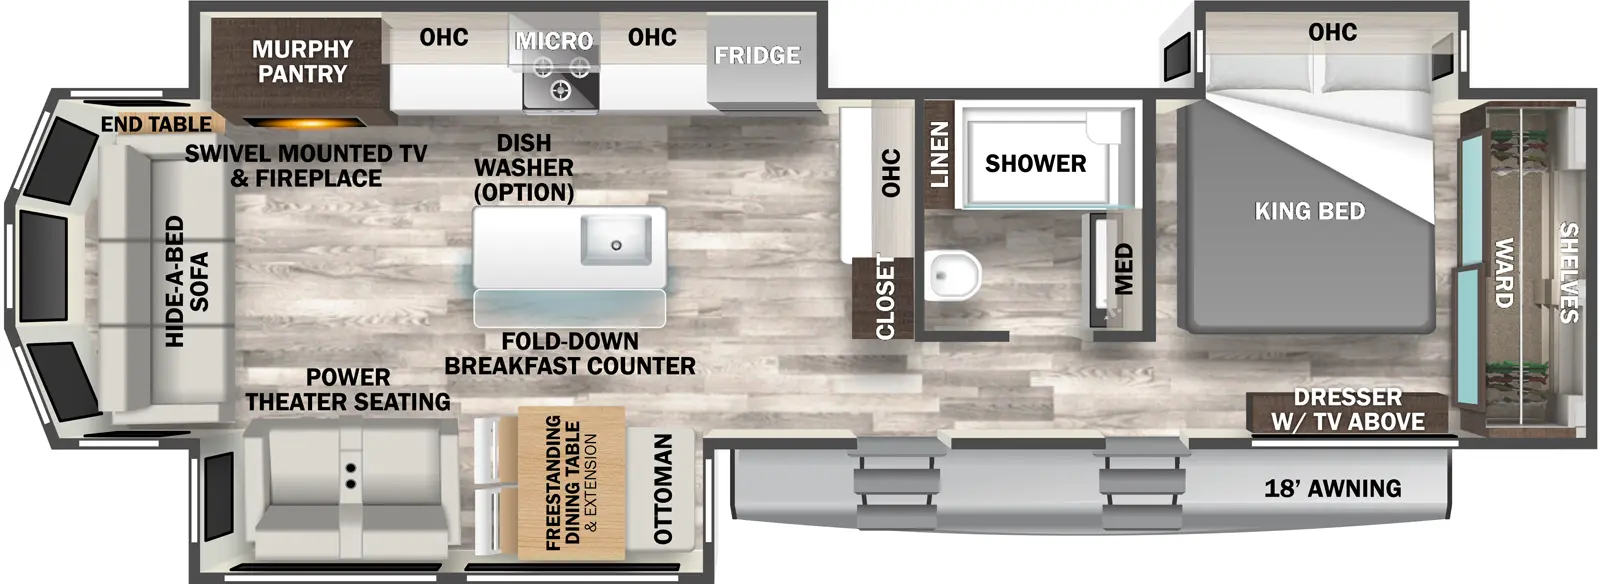 The 40CRS has three slideouts and two entries. Exterior features an 18 foot awning. Interior layout front to back: front wardrobe with shelves, off-door side king bed slideout with overhead cabinets, dresser with TV above, and step entry; off-door side full bathroom with medicine cabinet and linen closet; interior wall with closet, countertop and overhead cabinets; second entry; off-door side slideout with refrigerator, microwave, cooktop, overhead cabinets, and murphy pantry behind swivel mounted TV and fireplace; kitchen island with sink and fold-down breakfast counter (dishwasher optional); door side slideout with free-standing dining table with extension and ottoman, and power theater seating; hide-a-bed sofa with end table in rear alcove with windows.